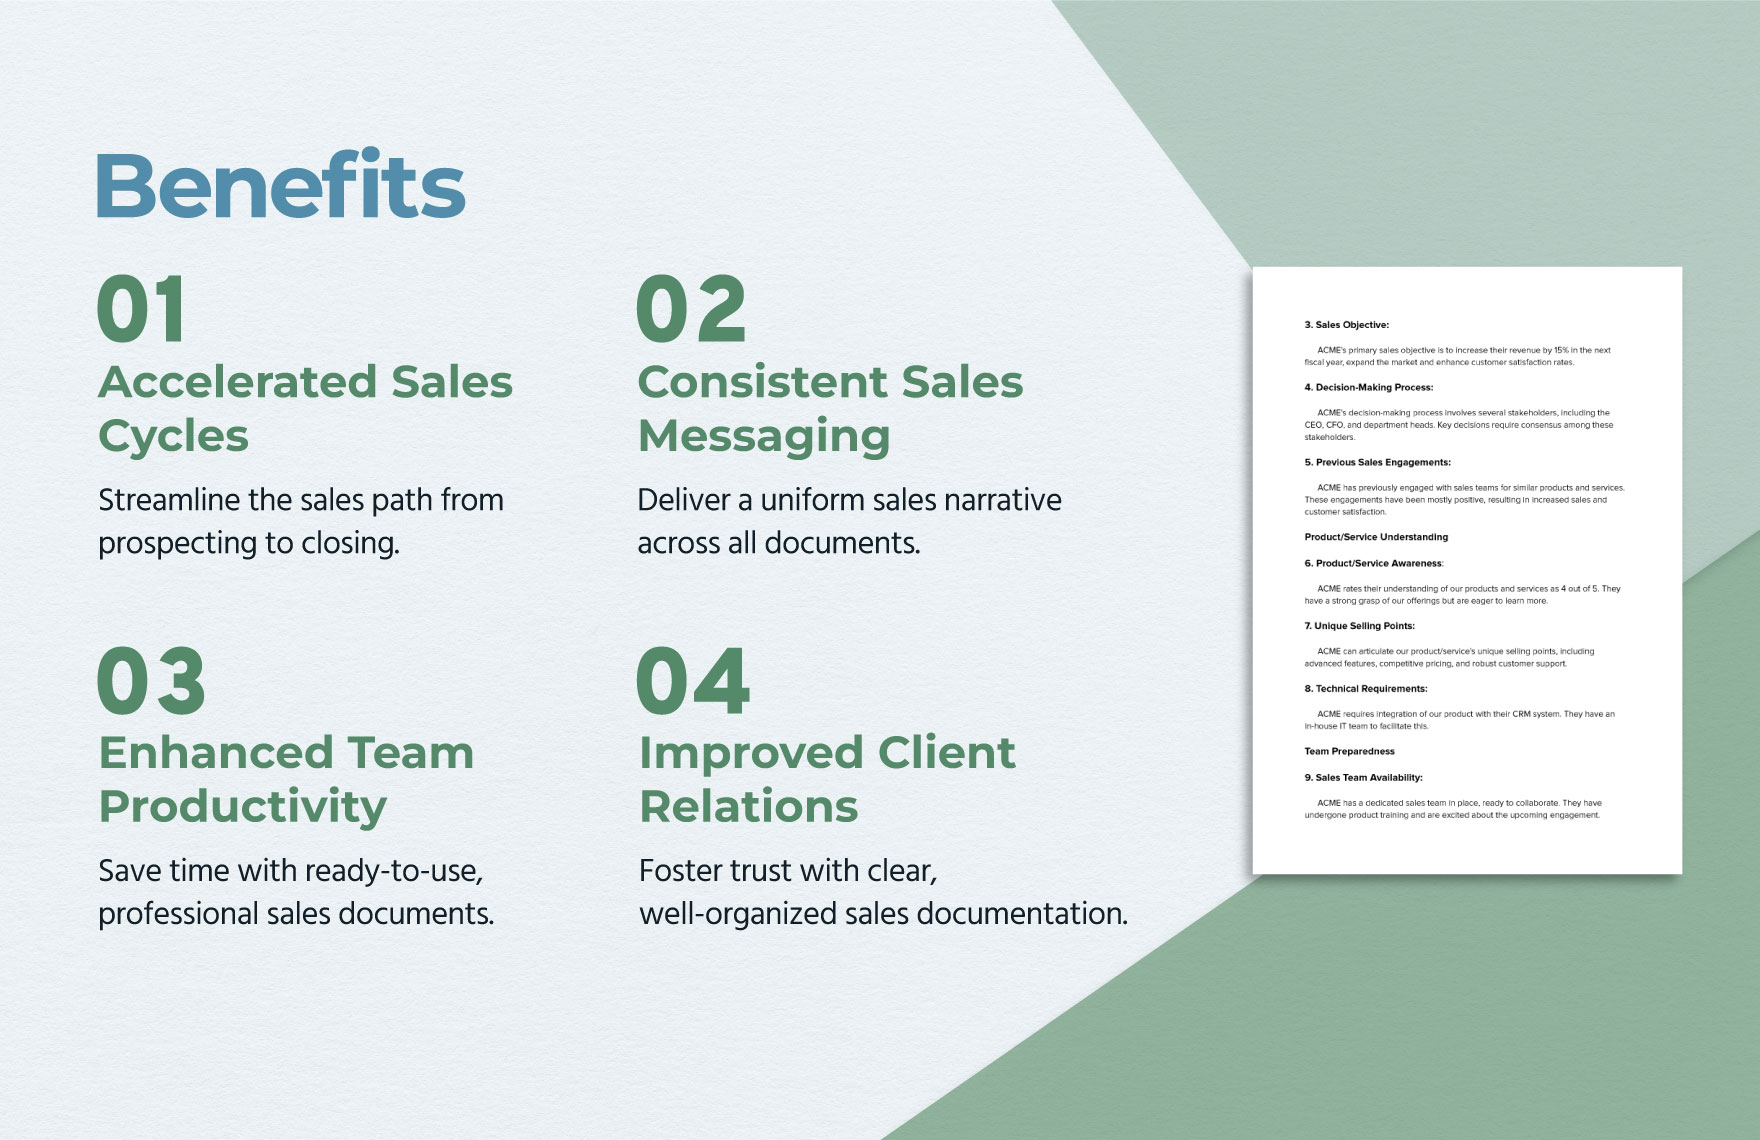 Sales Client Readiness Assessment Template